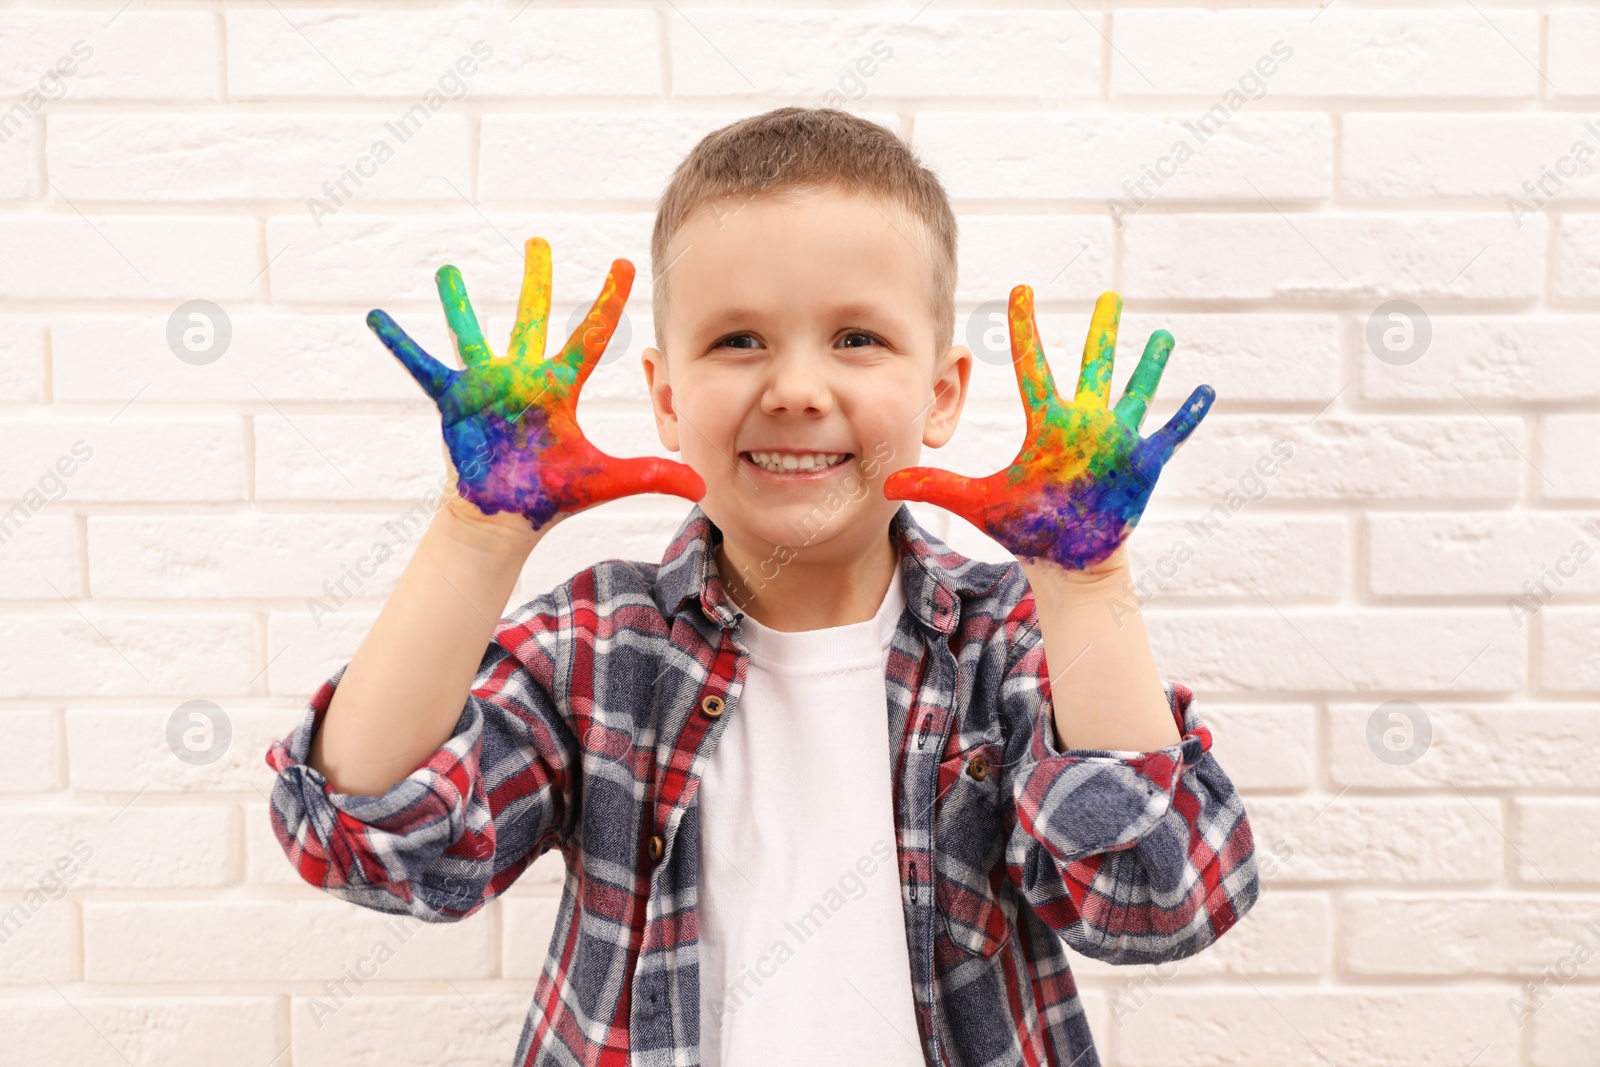 Photo of Happy little boy showing painted palms near white brick wall